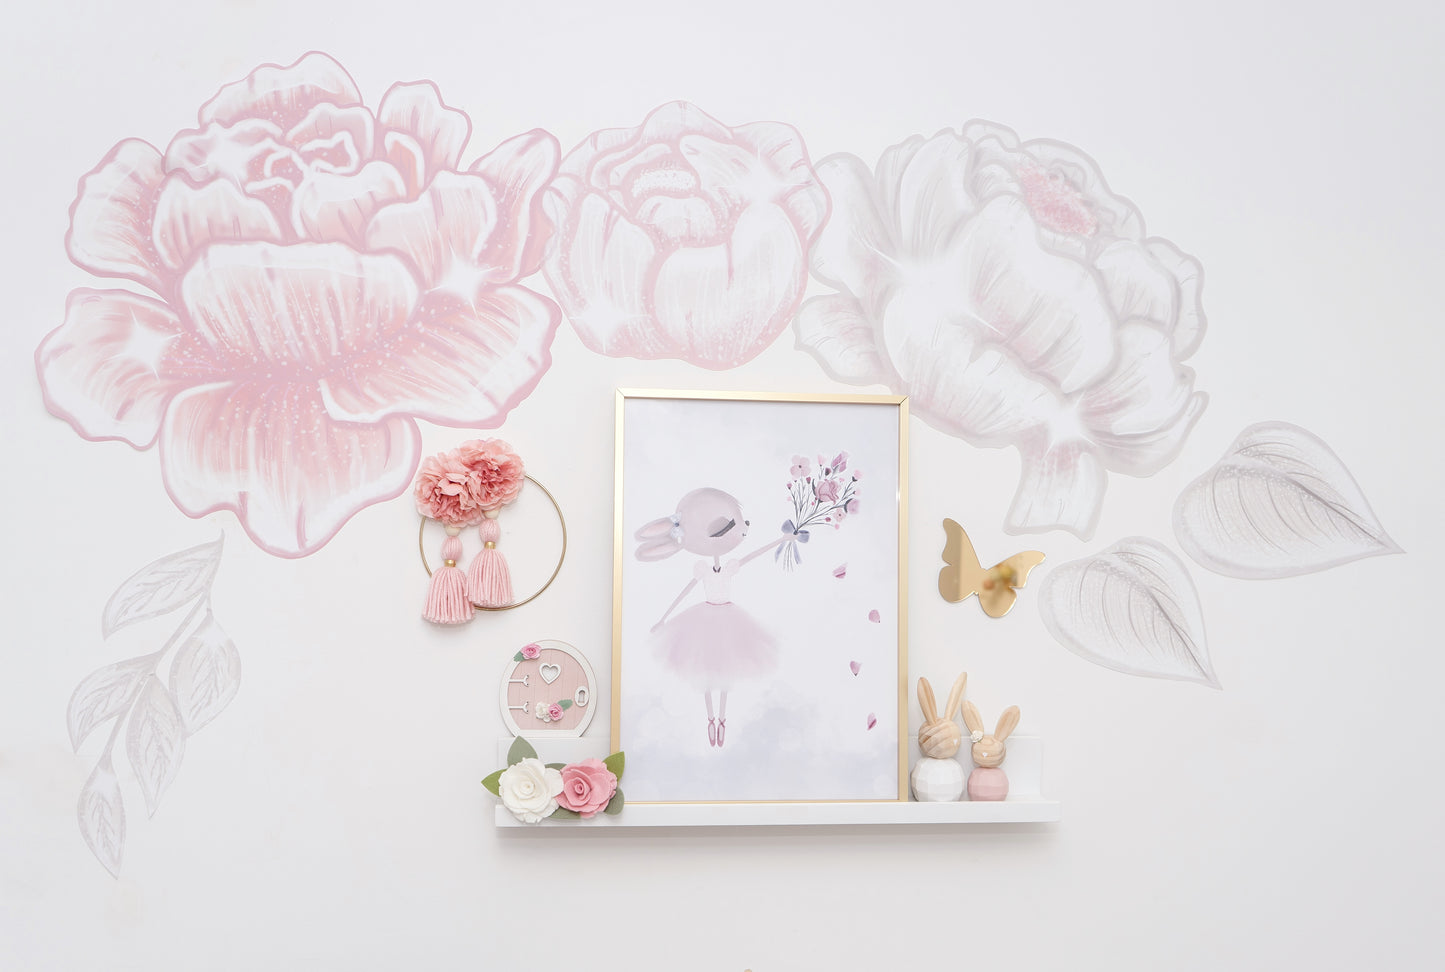 Blush Glamour Peonies Wall Decals - Mae She Reign - Creative Studio